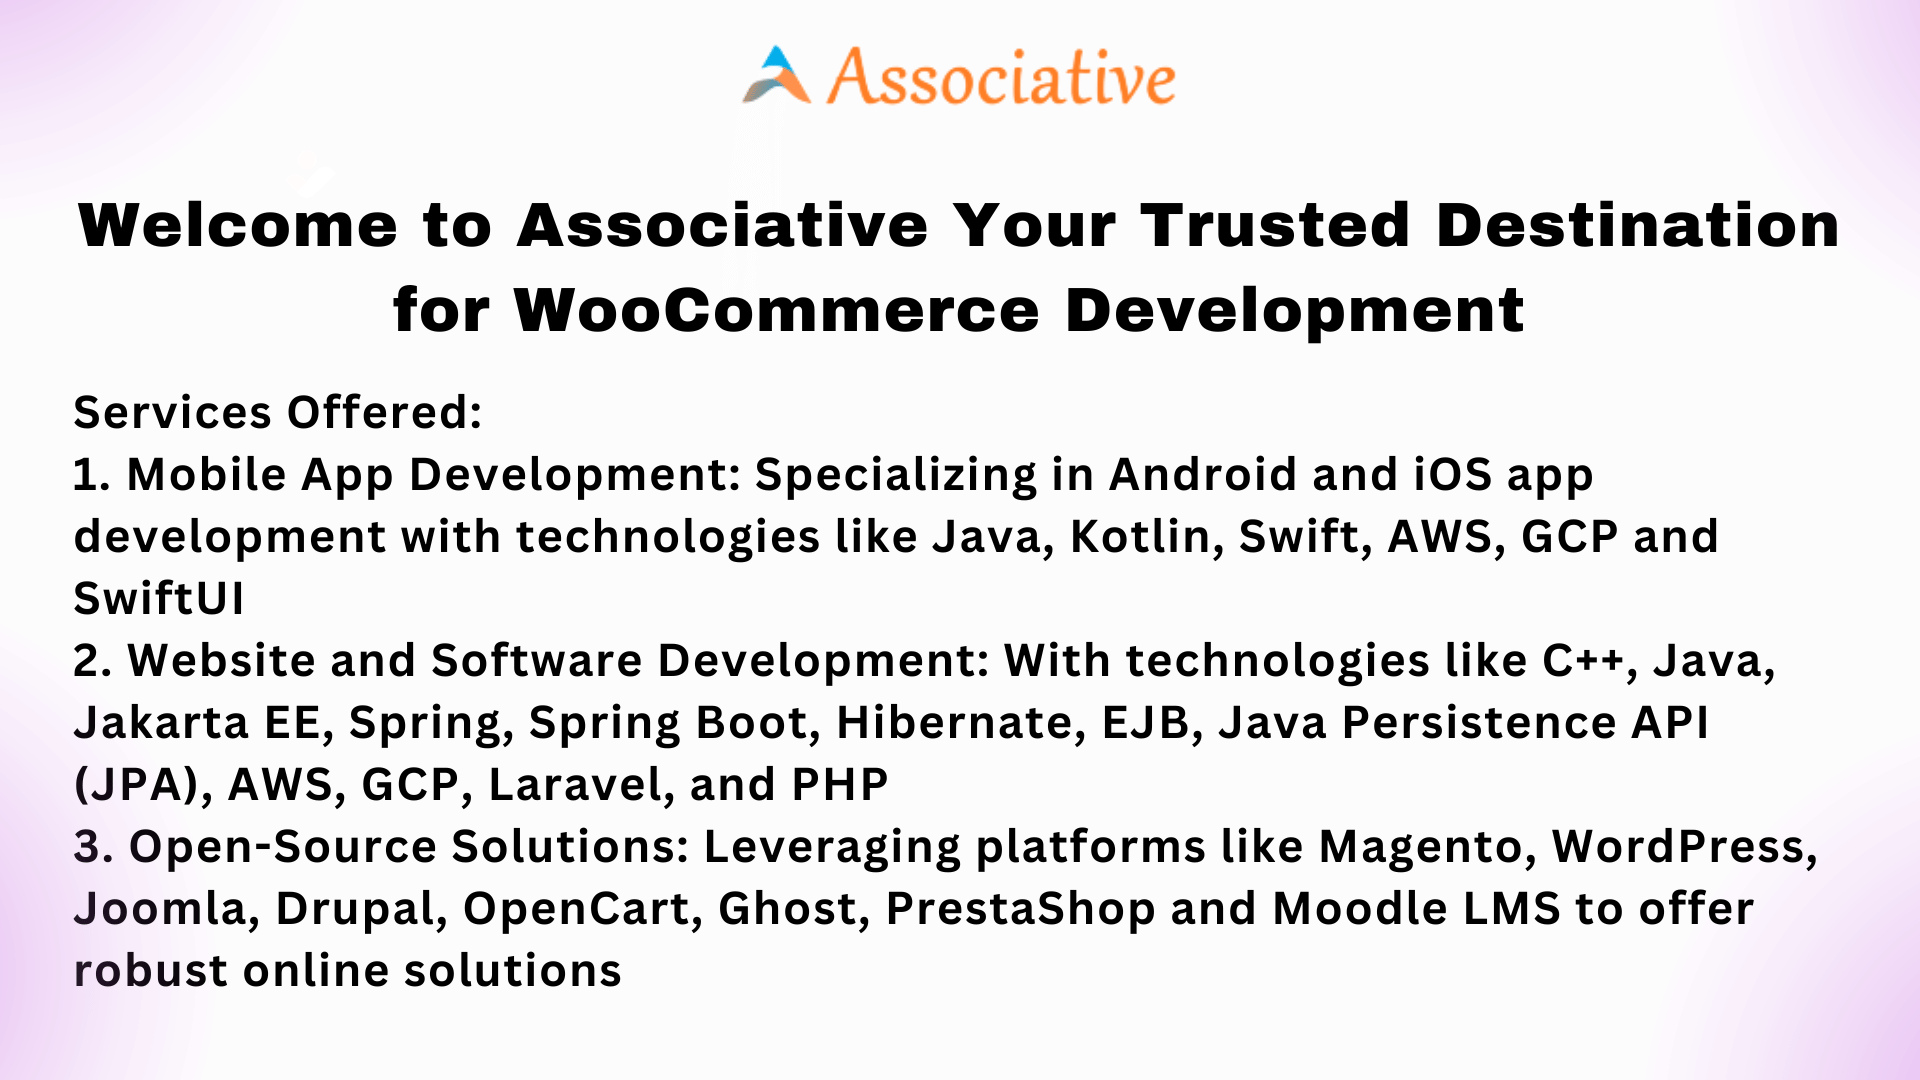 Welcome to Associative Your Trusted Destination for WooCommerce Development